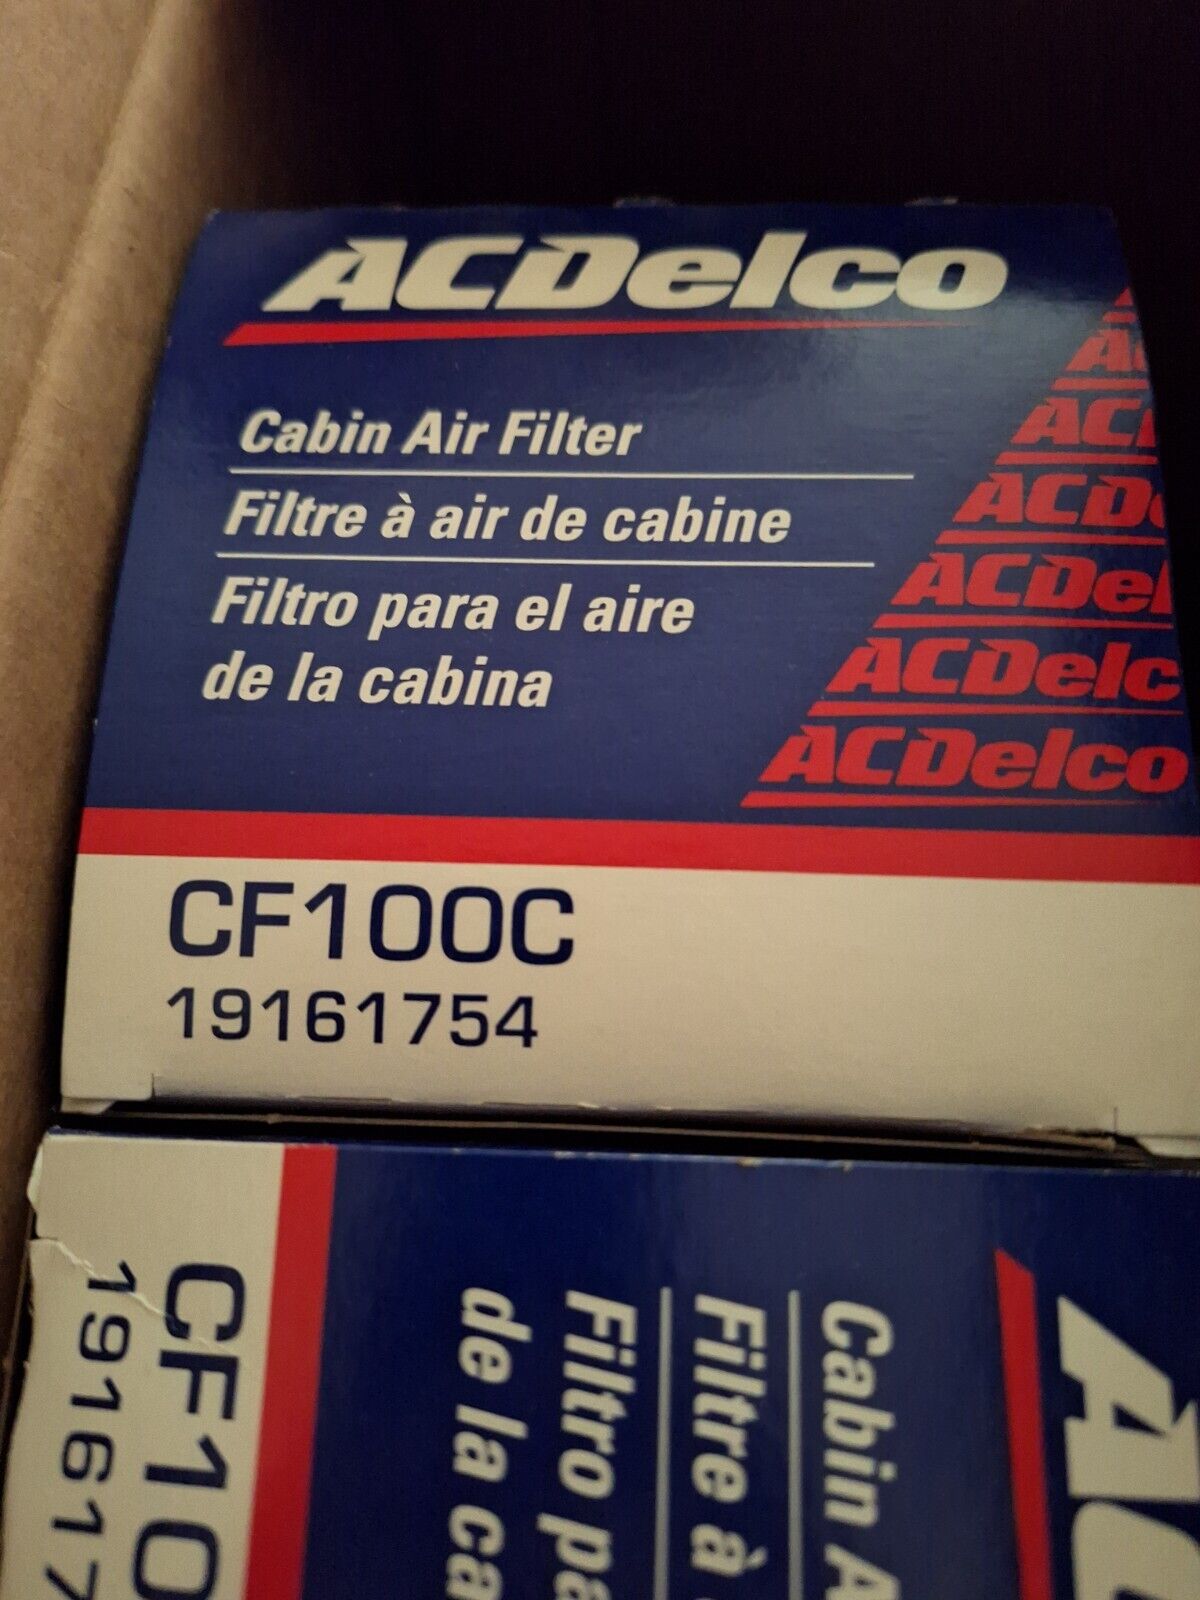 3 NEW GM ACDELCO CABIN AIR FILTERS 1996-2000 MONTANA VENTURE SILHOUETTE CF100